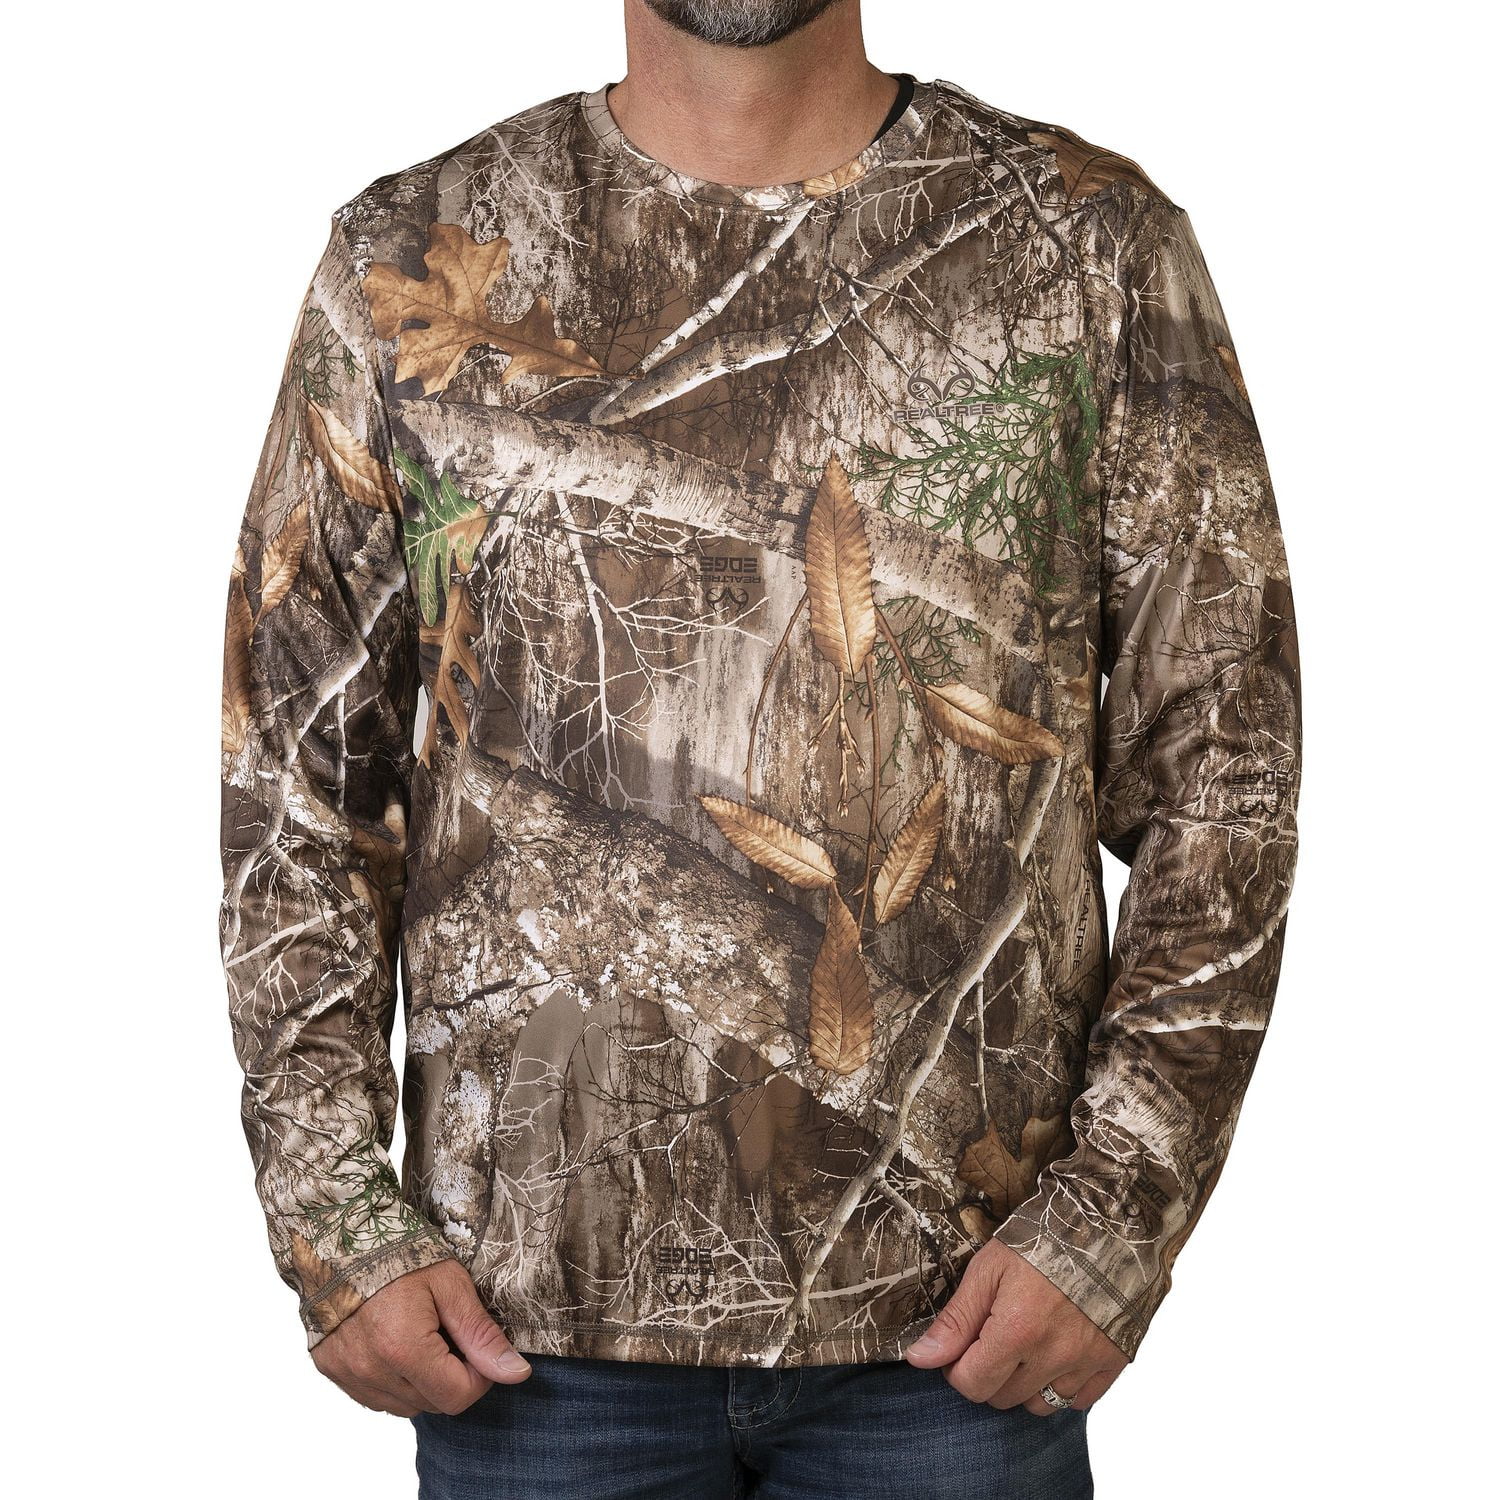 NOW AVAILABLE IN STORE* Wrapping up the first run of our realtree